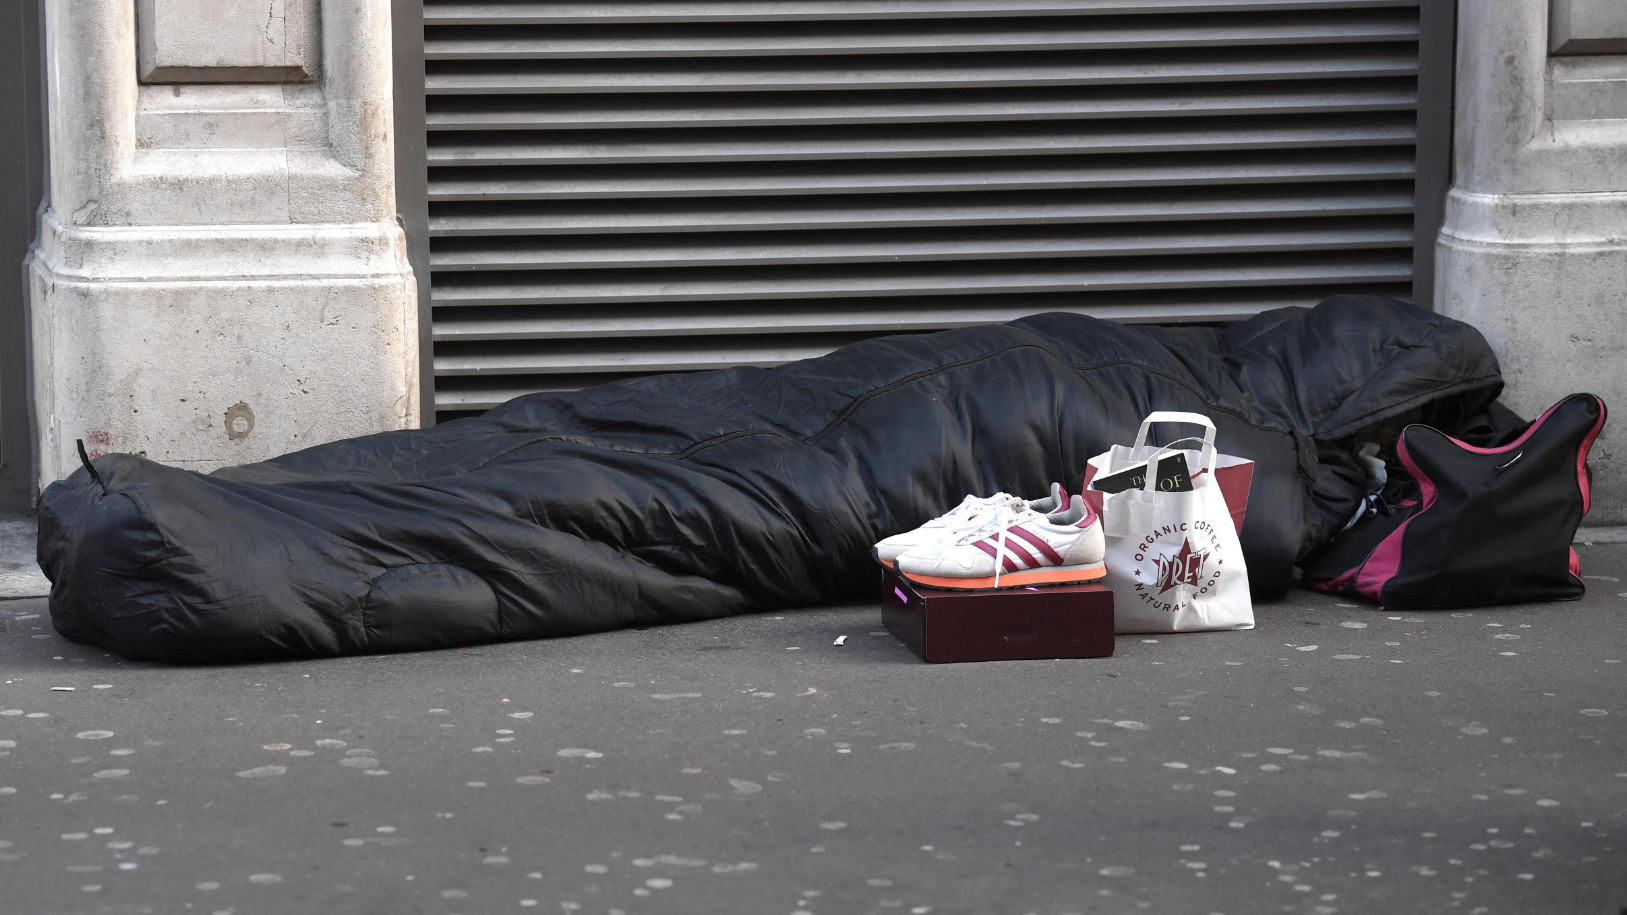 council homelessness cuts 'will put lives at risk'